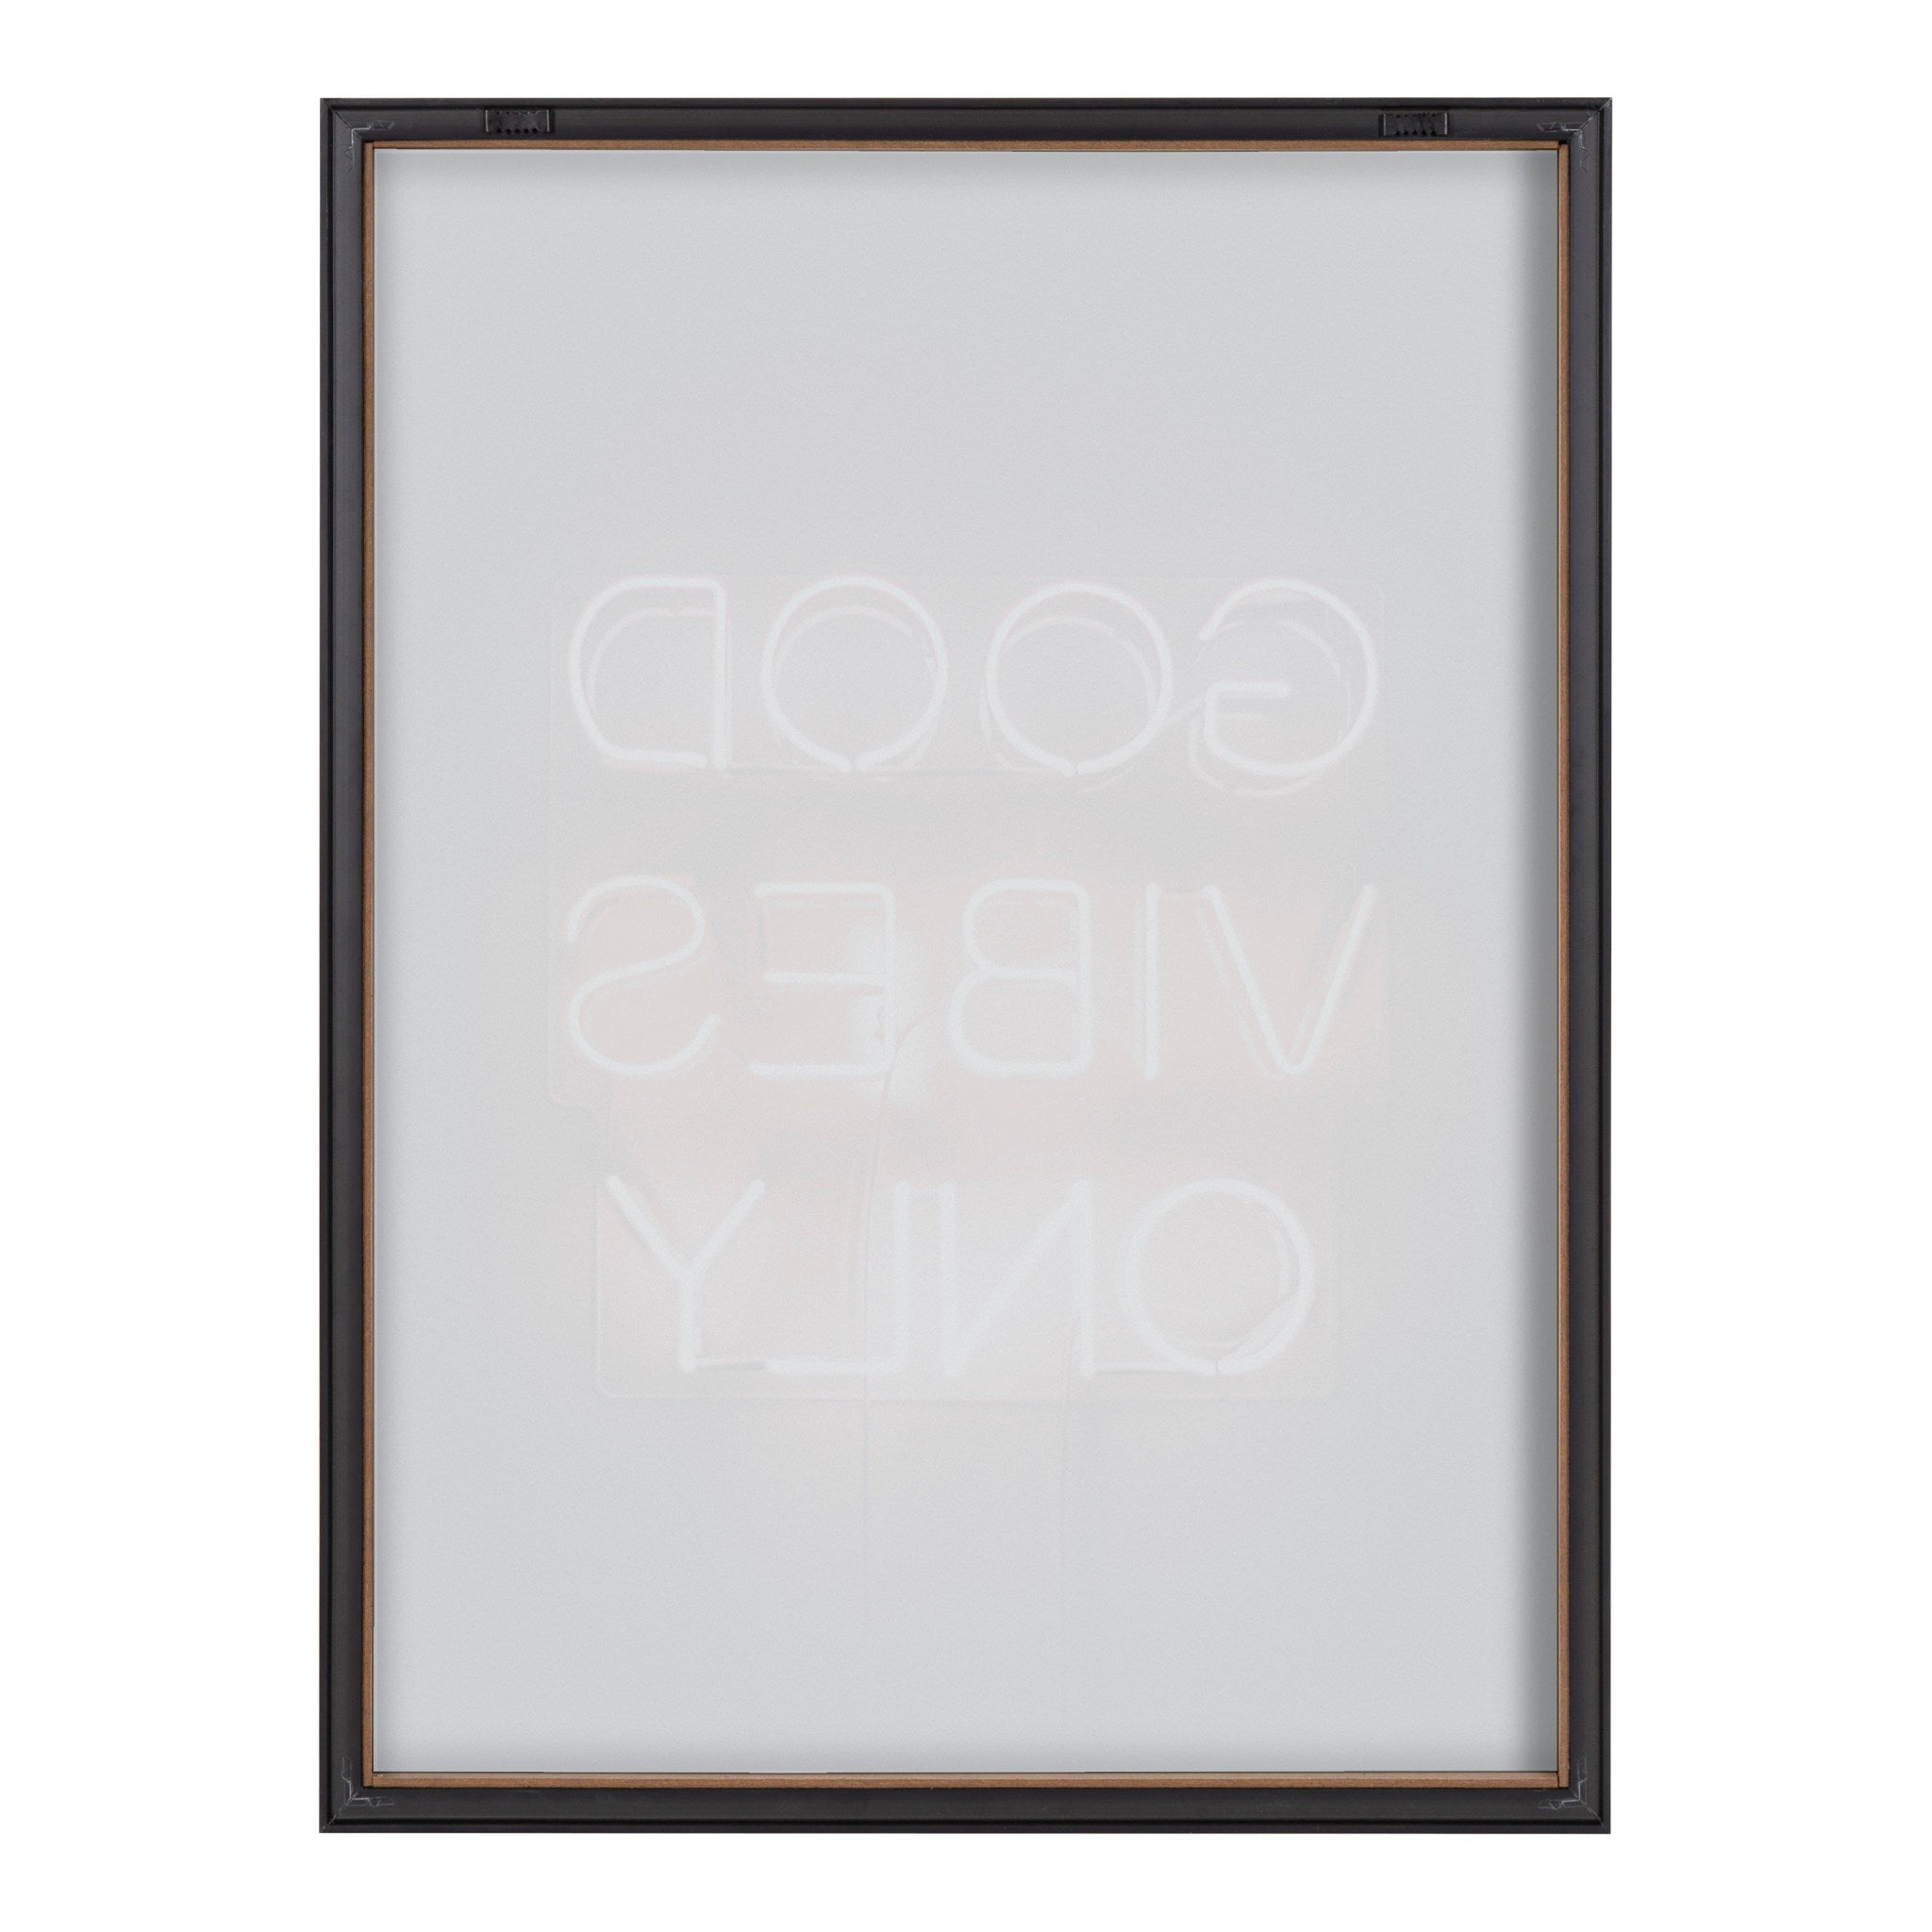 Blake Good Vibes Only Neon Sign Framed Printed Glass by The Creative Bunch Studio